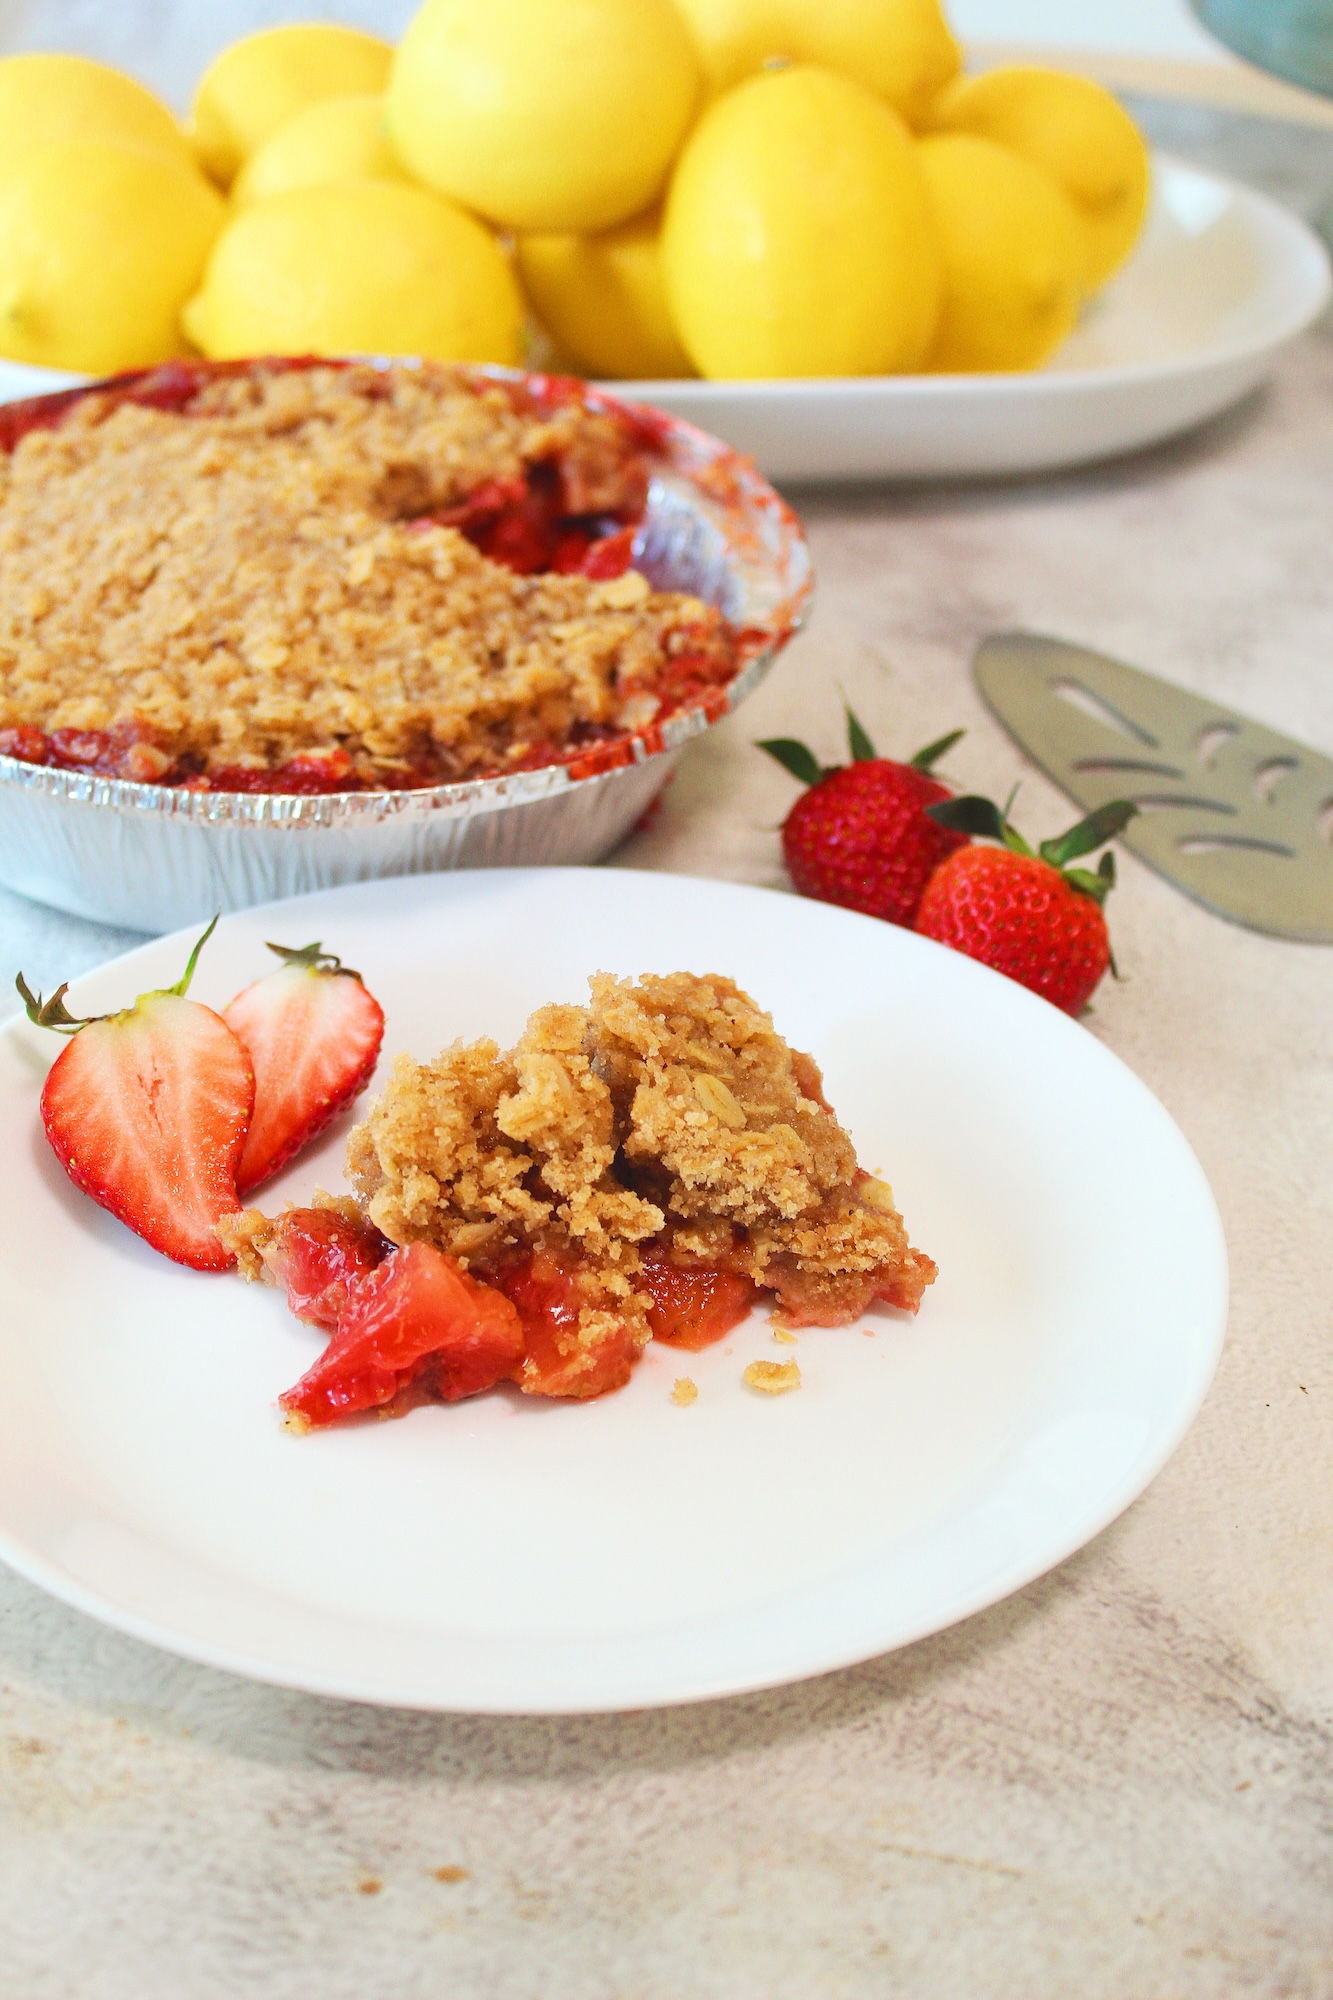 Crumbs and Grubs' strawberry crumble pie for the Chinese New Year and Valentine's Day celebration? Yes please